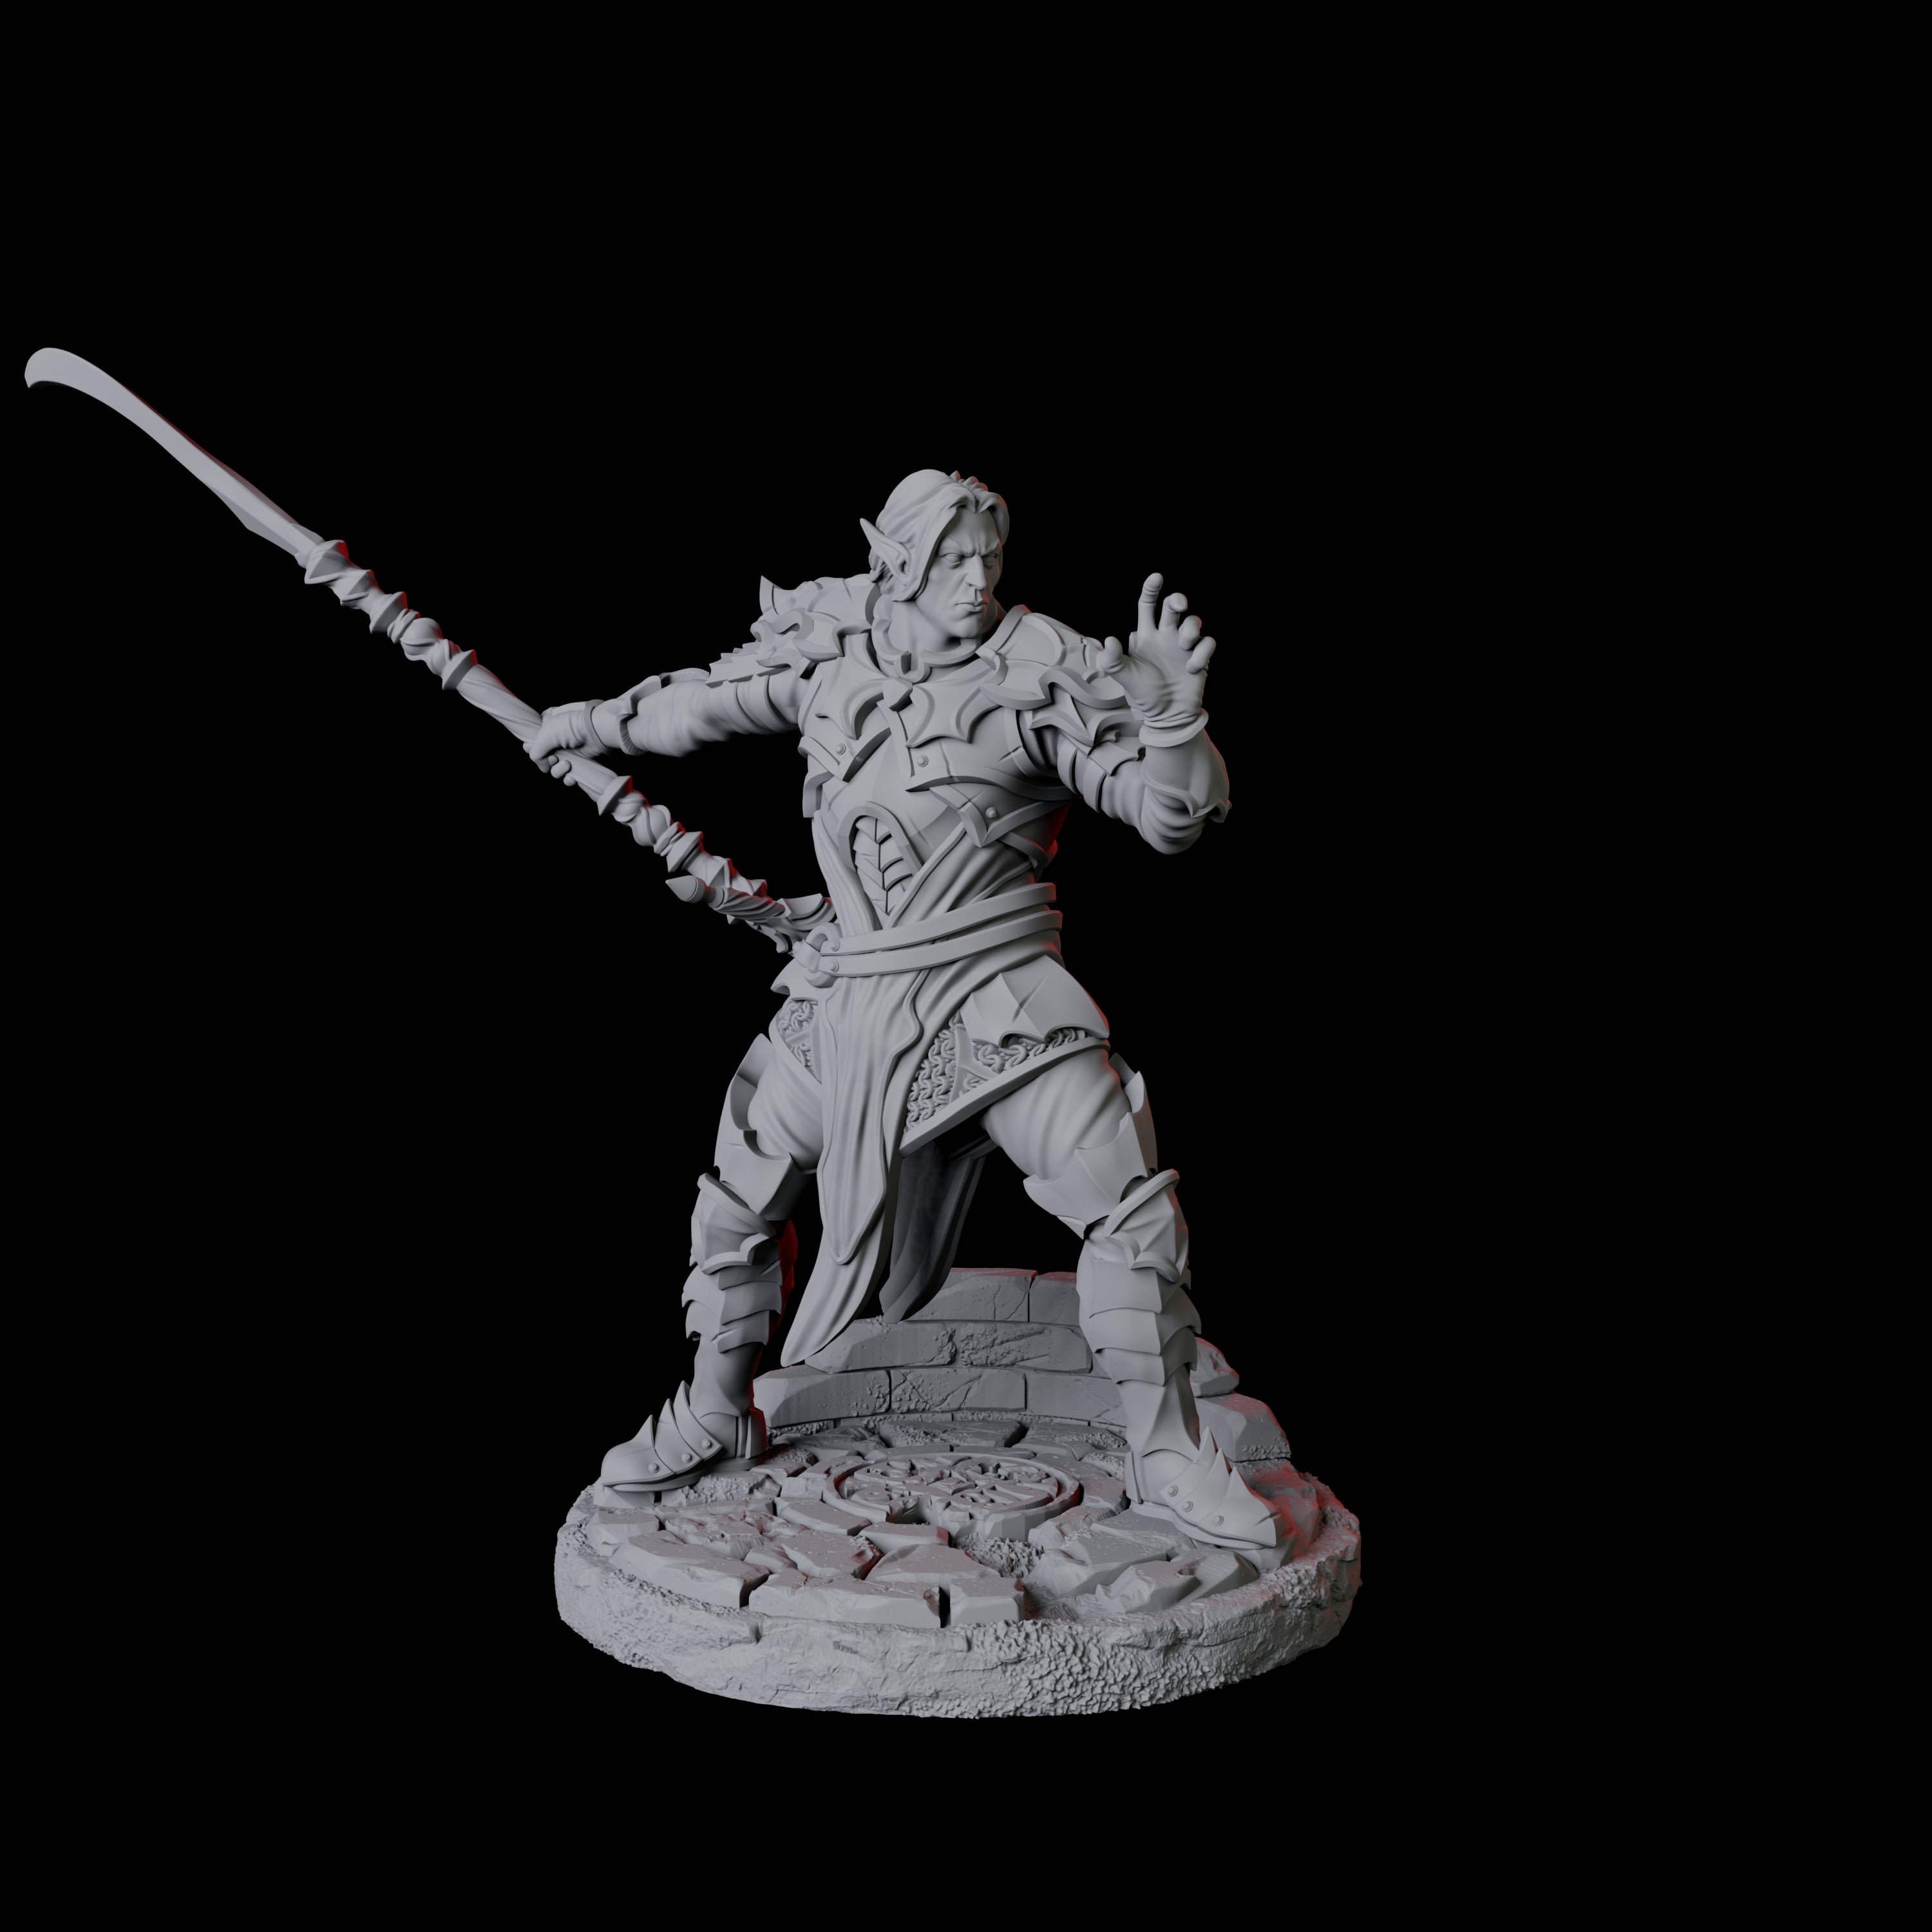 Poised Fighter C Miniature for Dungeons and Dragons, Pathfinder or other TTRPGs